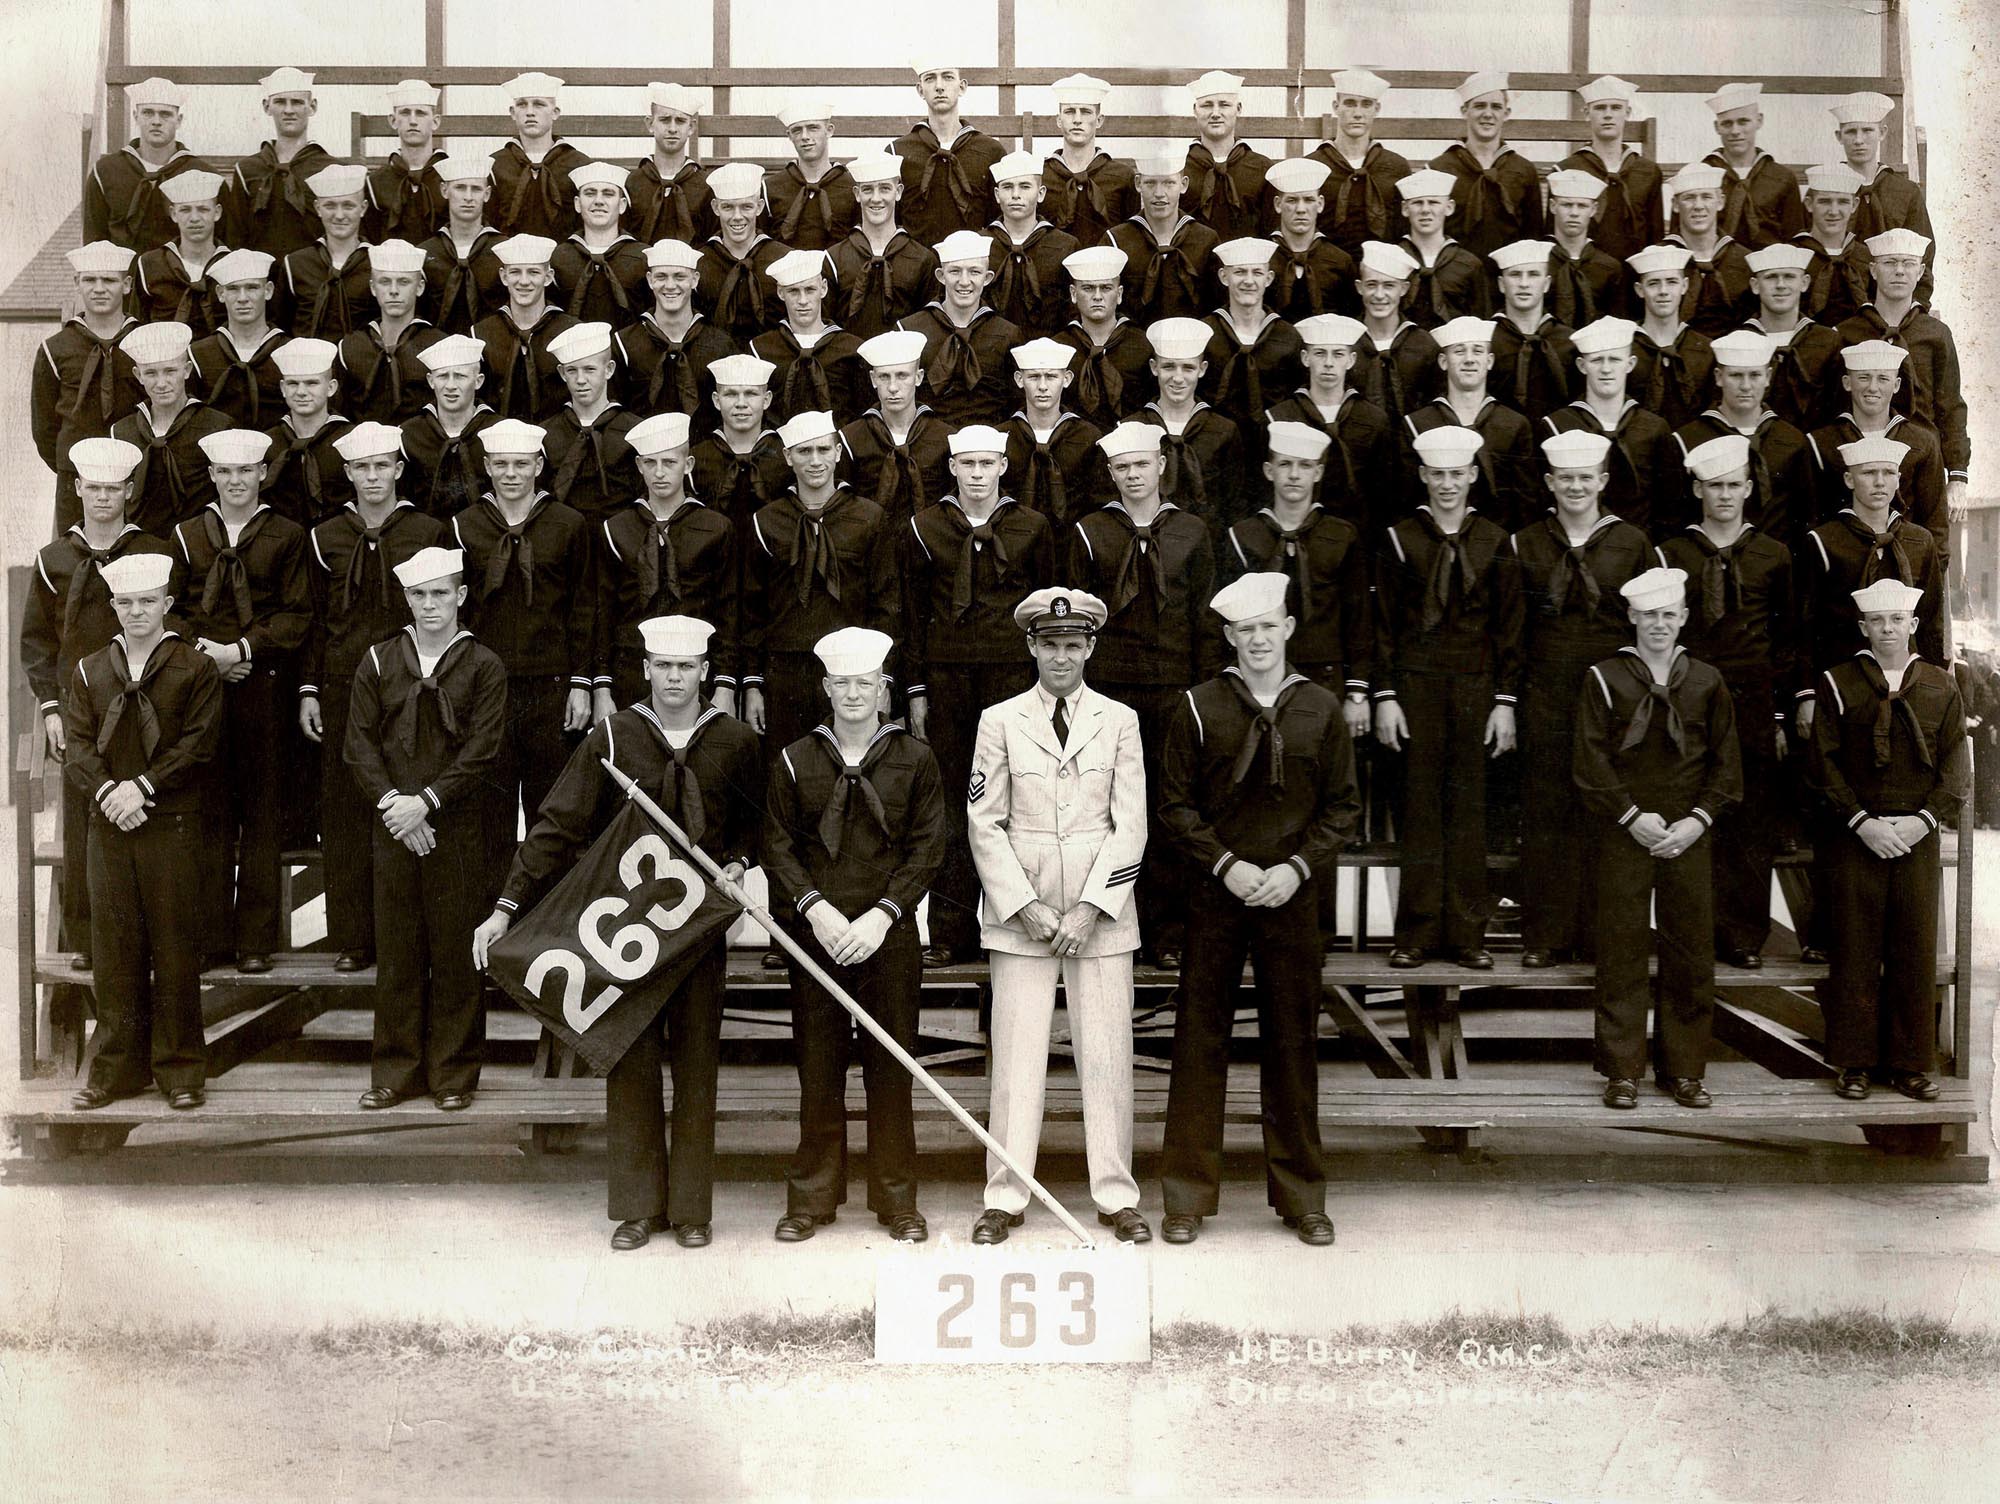 My Uncle Charles "Sonny" Haile (seen earlier) from his August 5, 1949 company photo in San Diego. He's the 5th sailor from the right on the 3rd row.